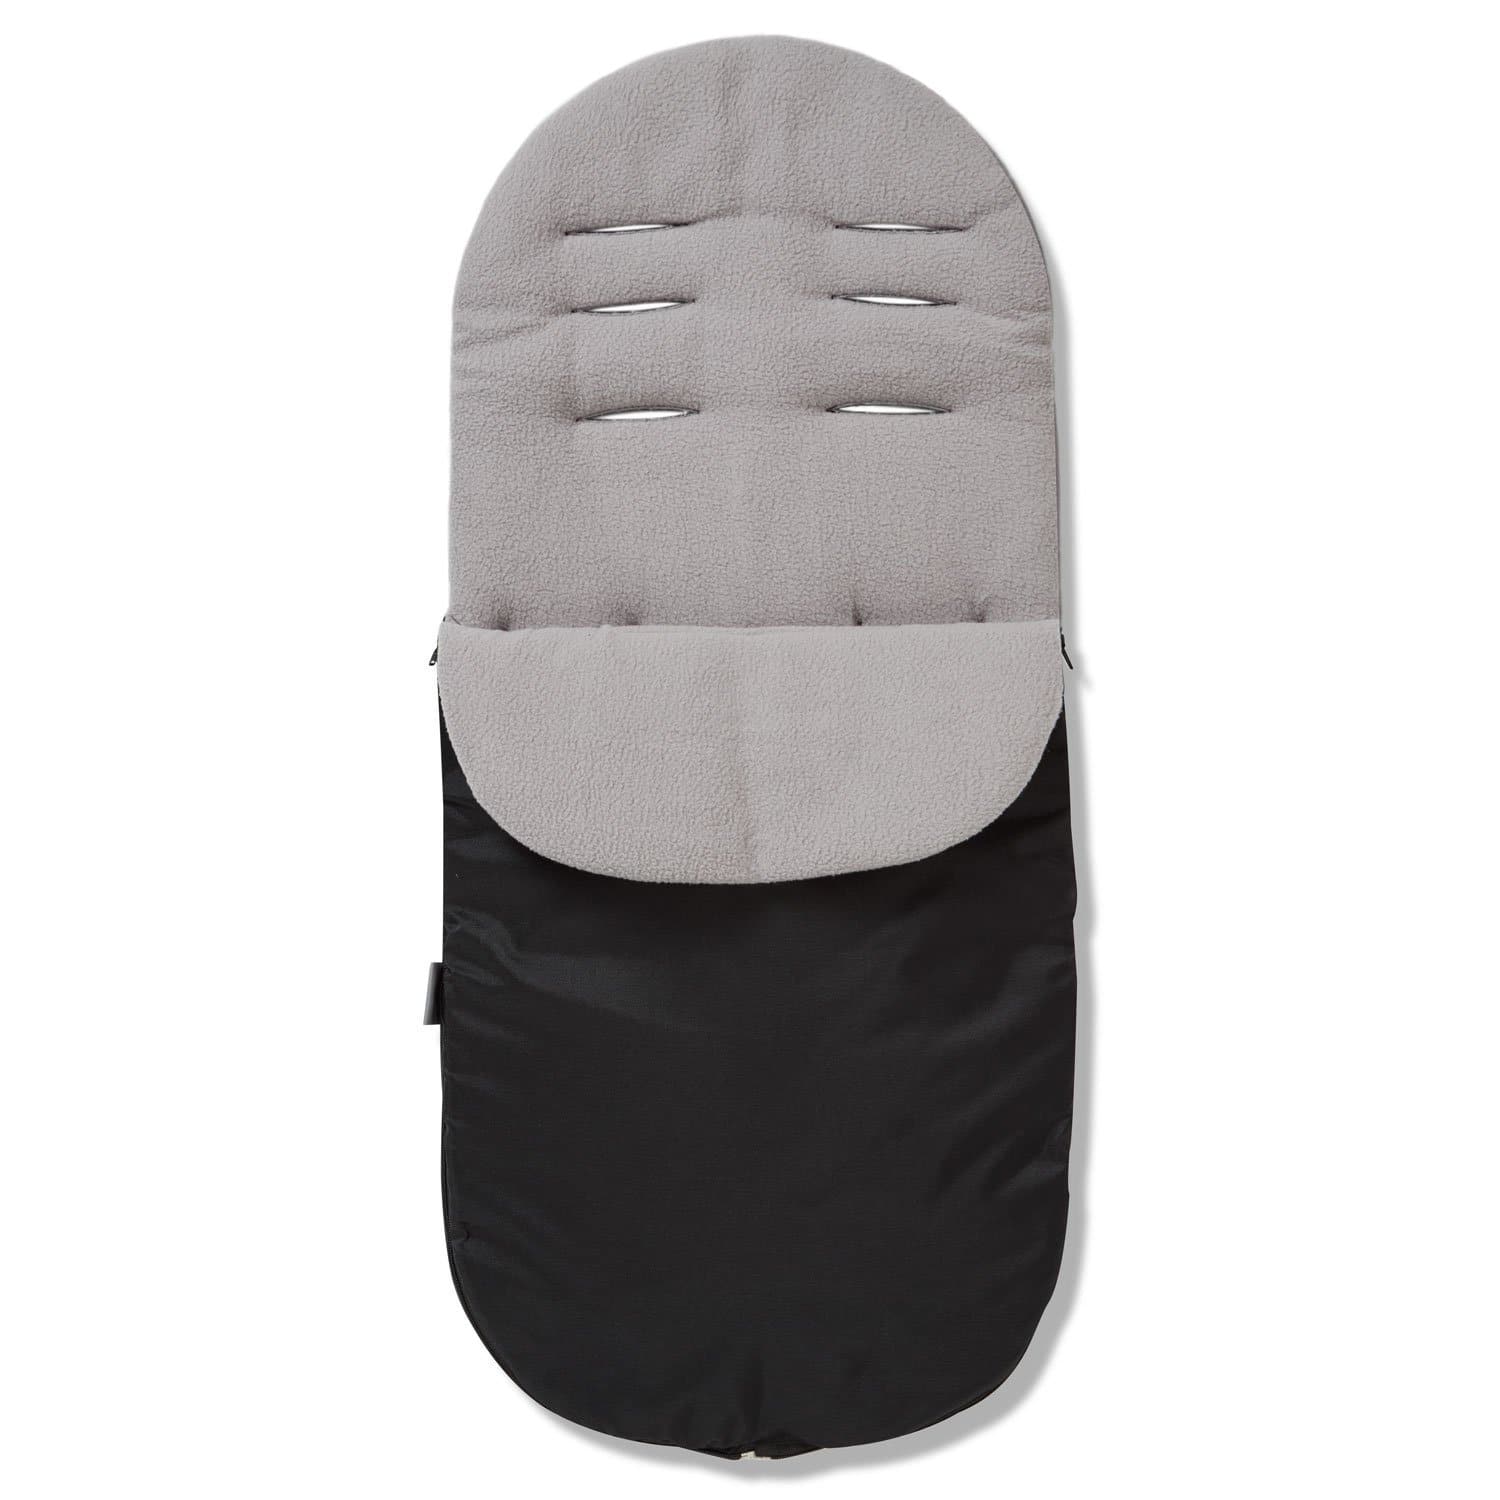 Footmuff / Cosy Toes Compatible with Bugaboo - Grey / Fits All Models | For Your Little One